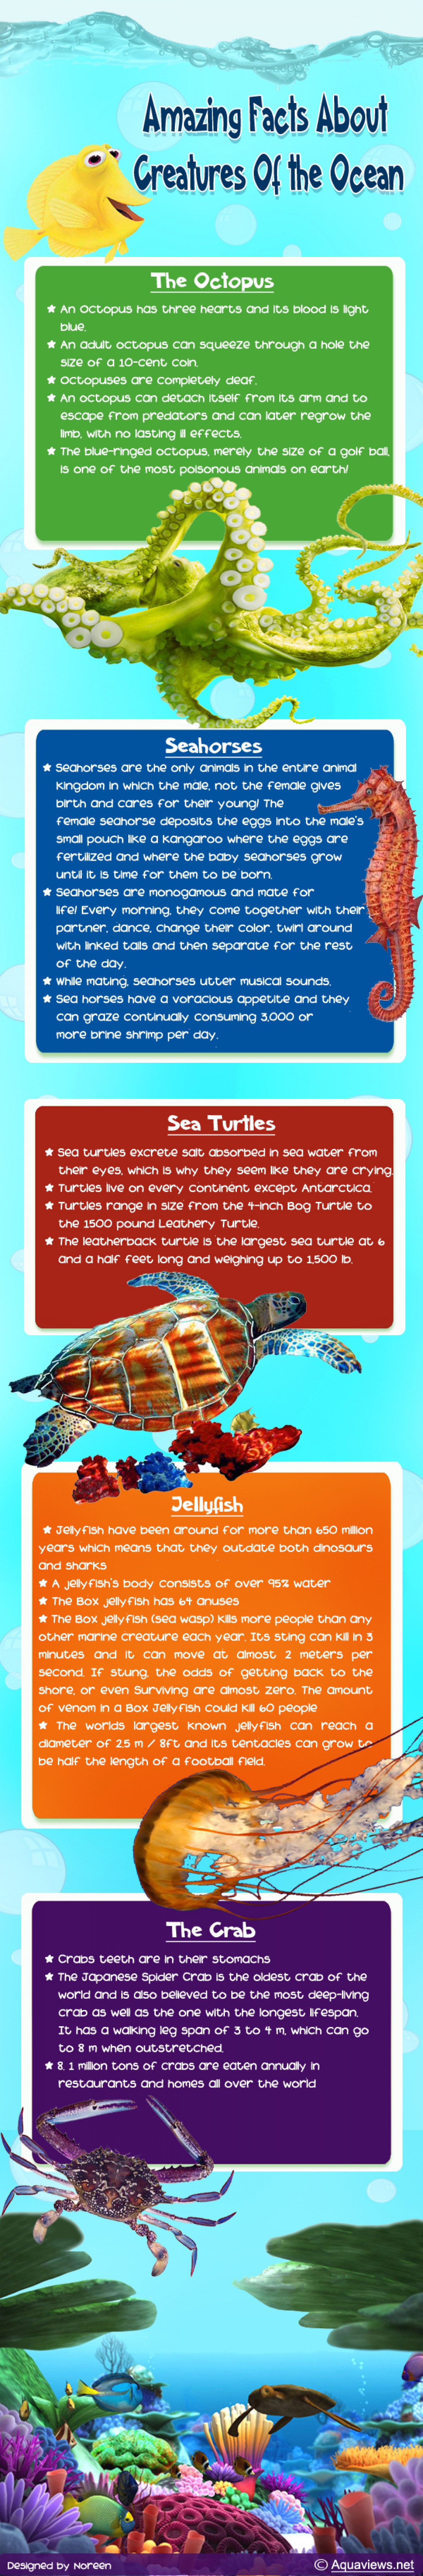 amazing-facts-about-creatures-of-the-ocean